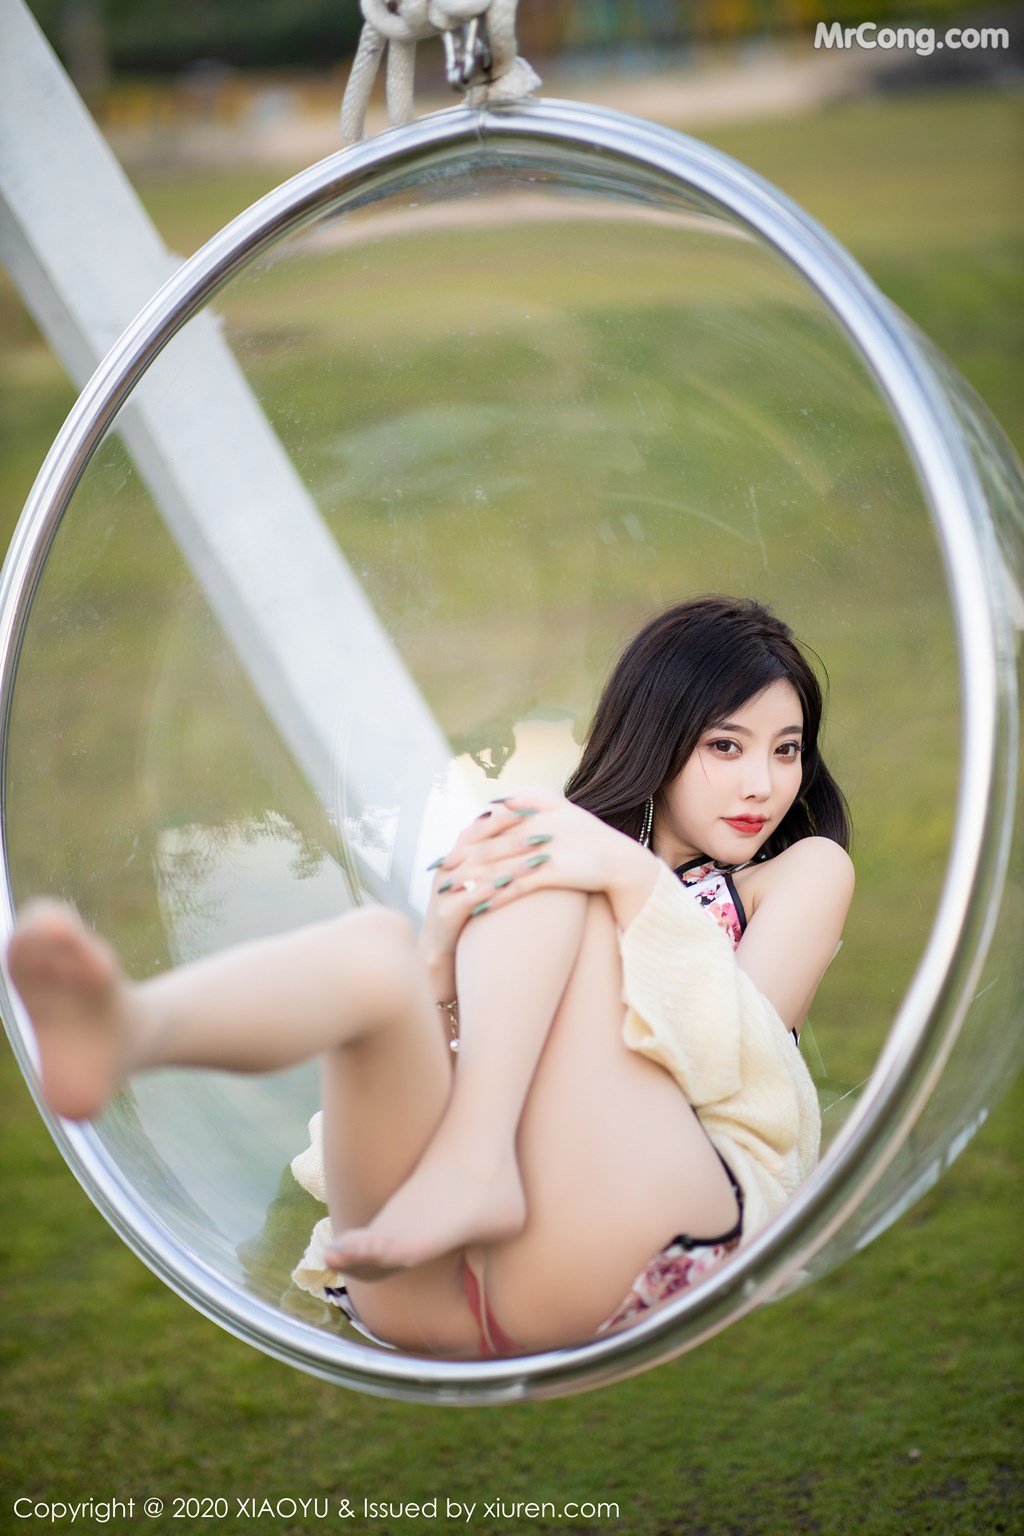 XiaoYu Vol.233: Yang Chen Chen (杨晨晨 sugar) (141 pictures)